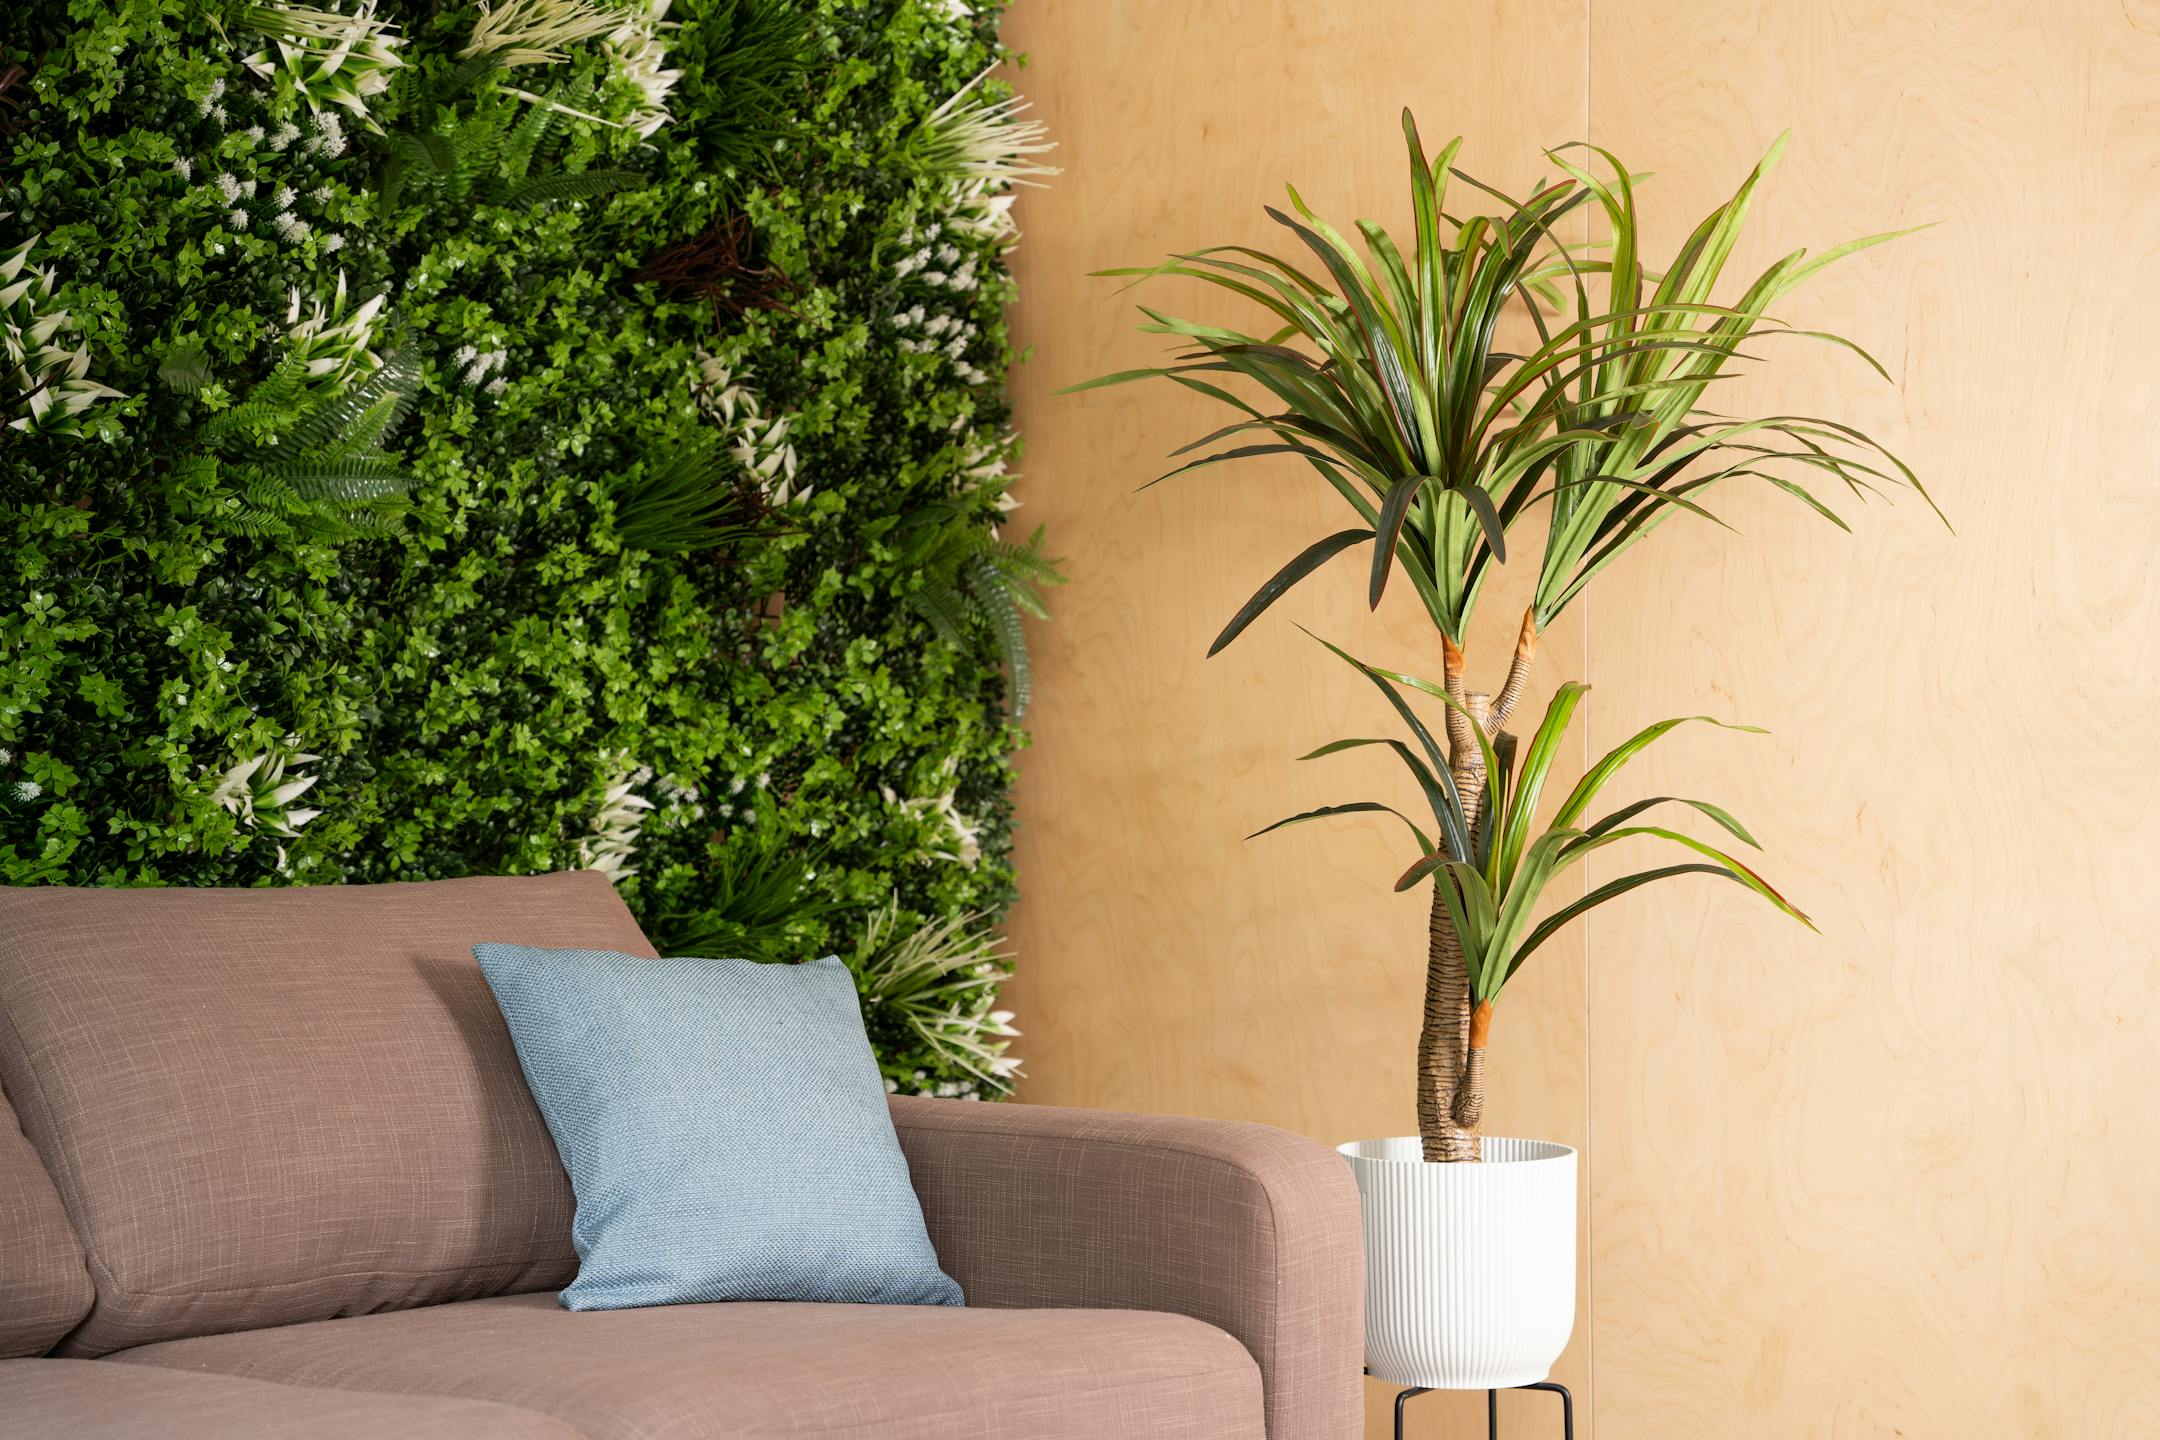 Artificial yucca plant next to brown sofa and living wall